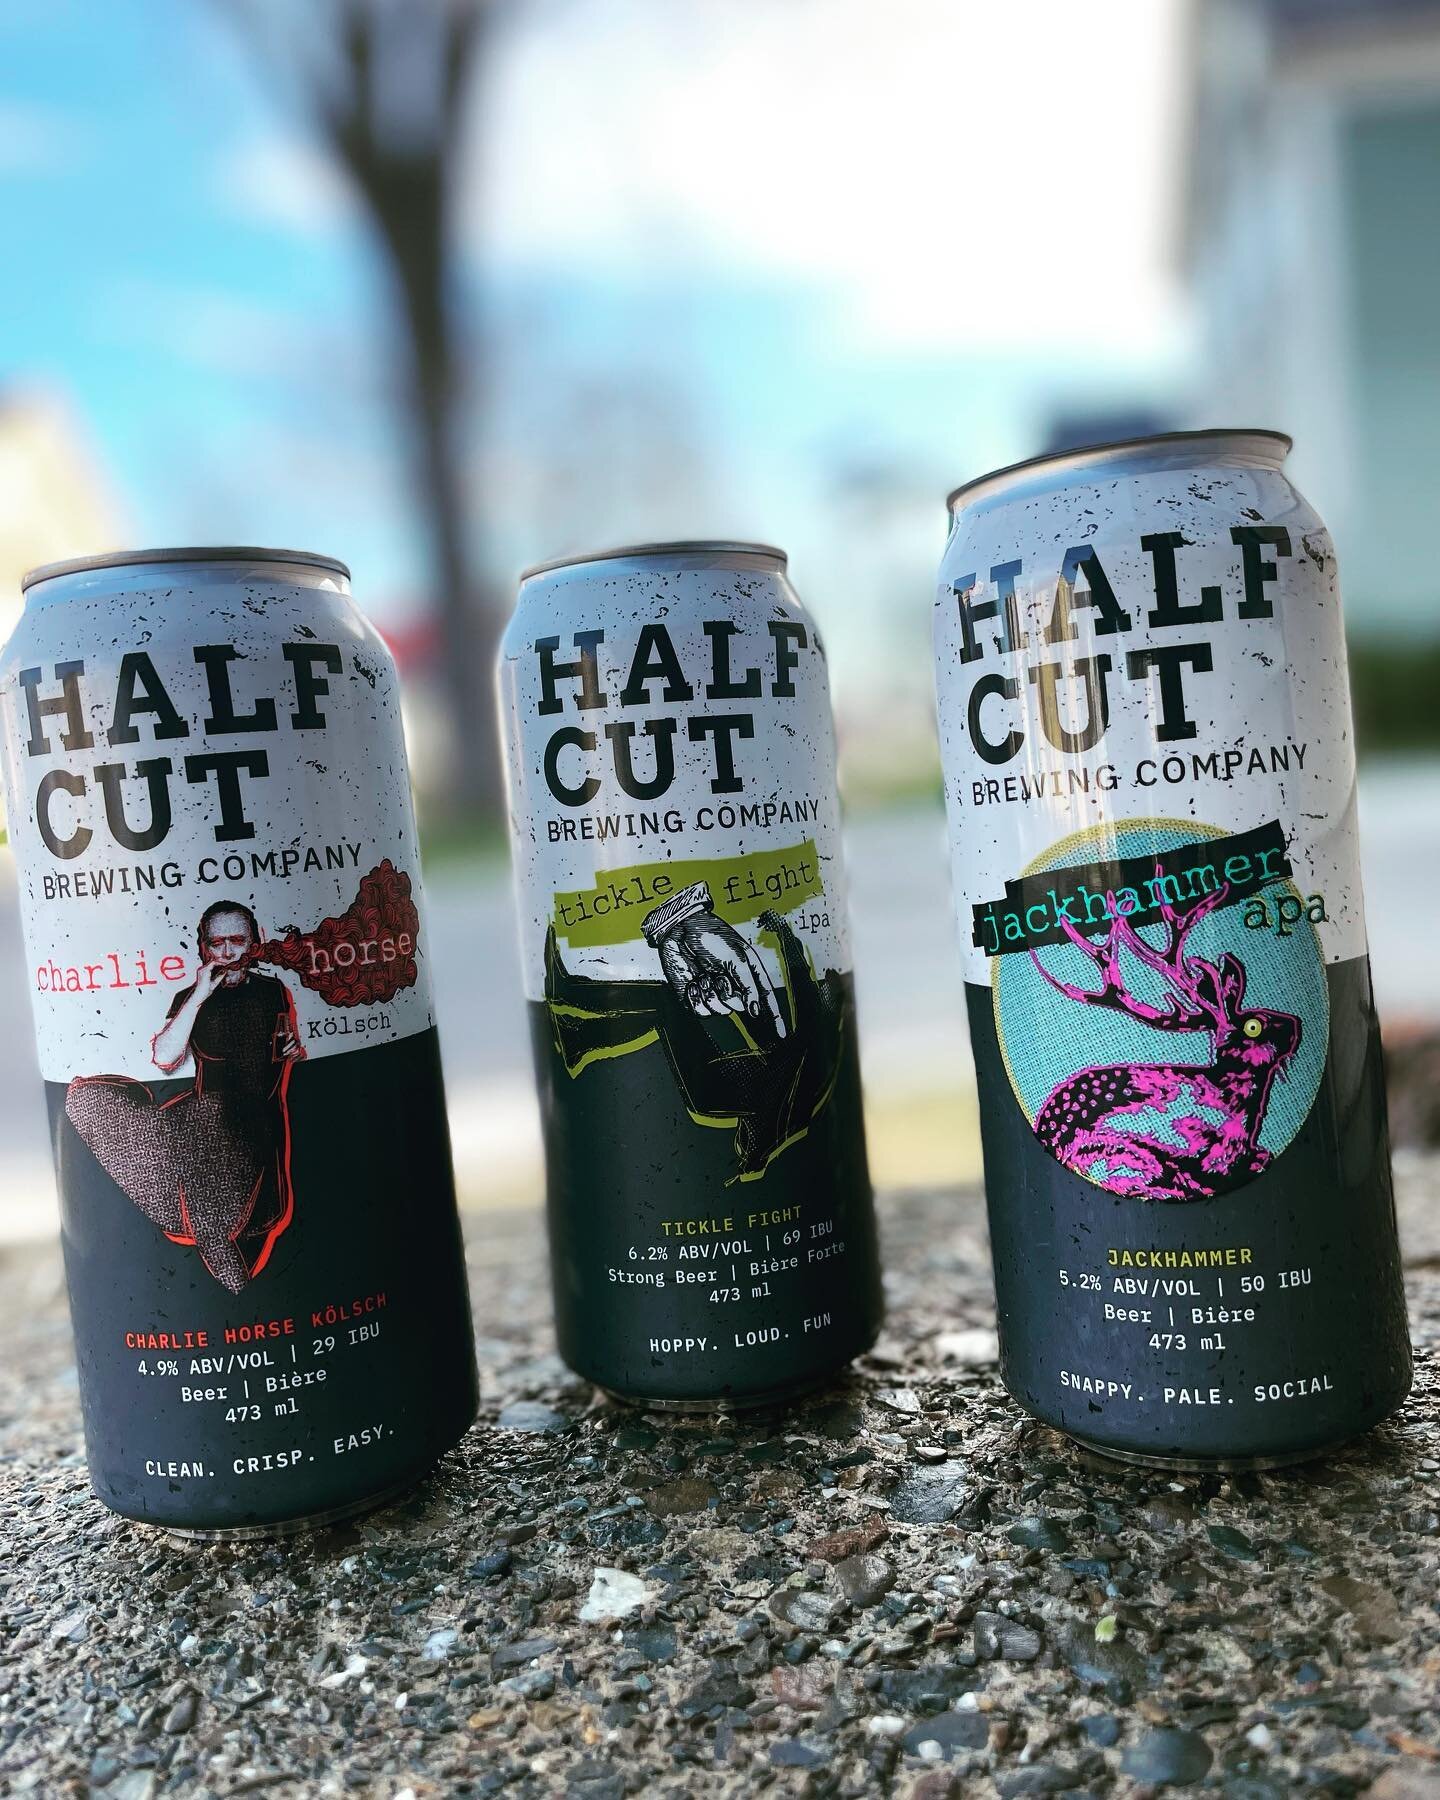 Half Cut. Officially, the unofficial beer of the #ecma2022
&bull;
&bull;
&bull;
&bull;
&bull;
#craftbeer #downtownfredericton #fredericton #drinklocal #tipyourbartender @fredtourism @eastcoastmusicassoc @excellencenb @anbl @downtown_fredericton